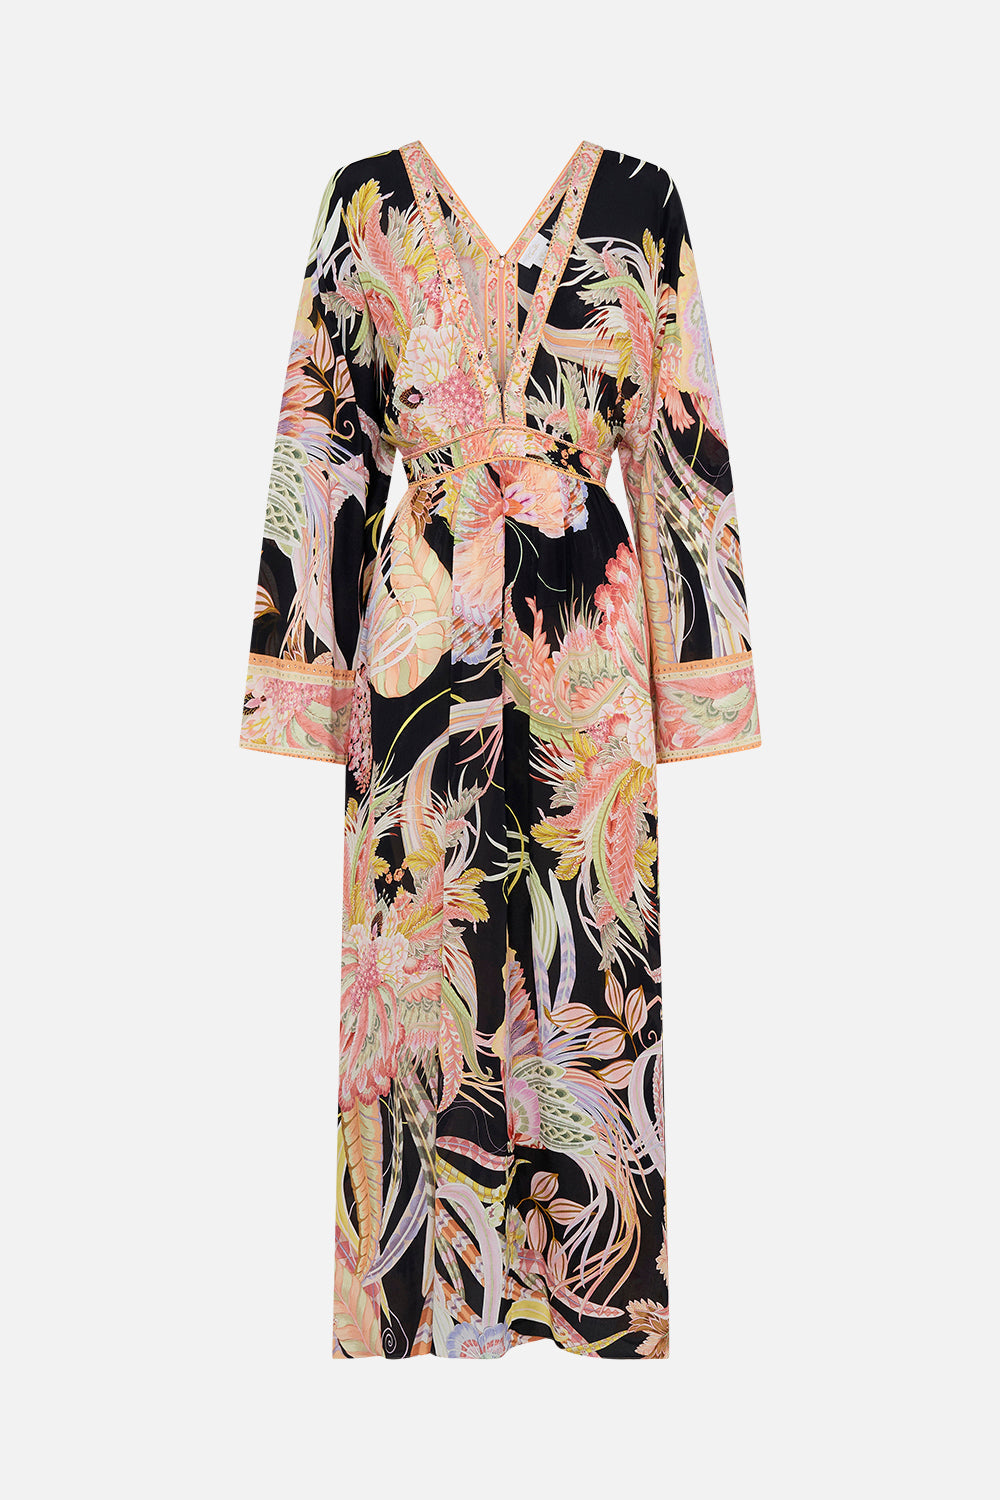 Product view of CAMILLA designer silk dress in Lady Of The Moon print